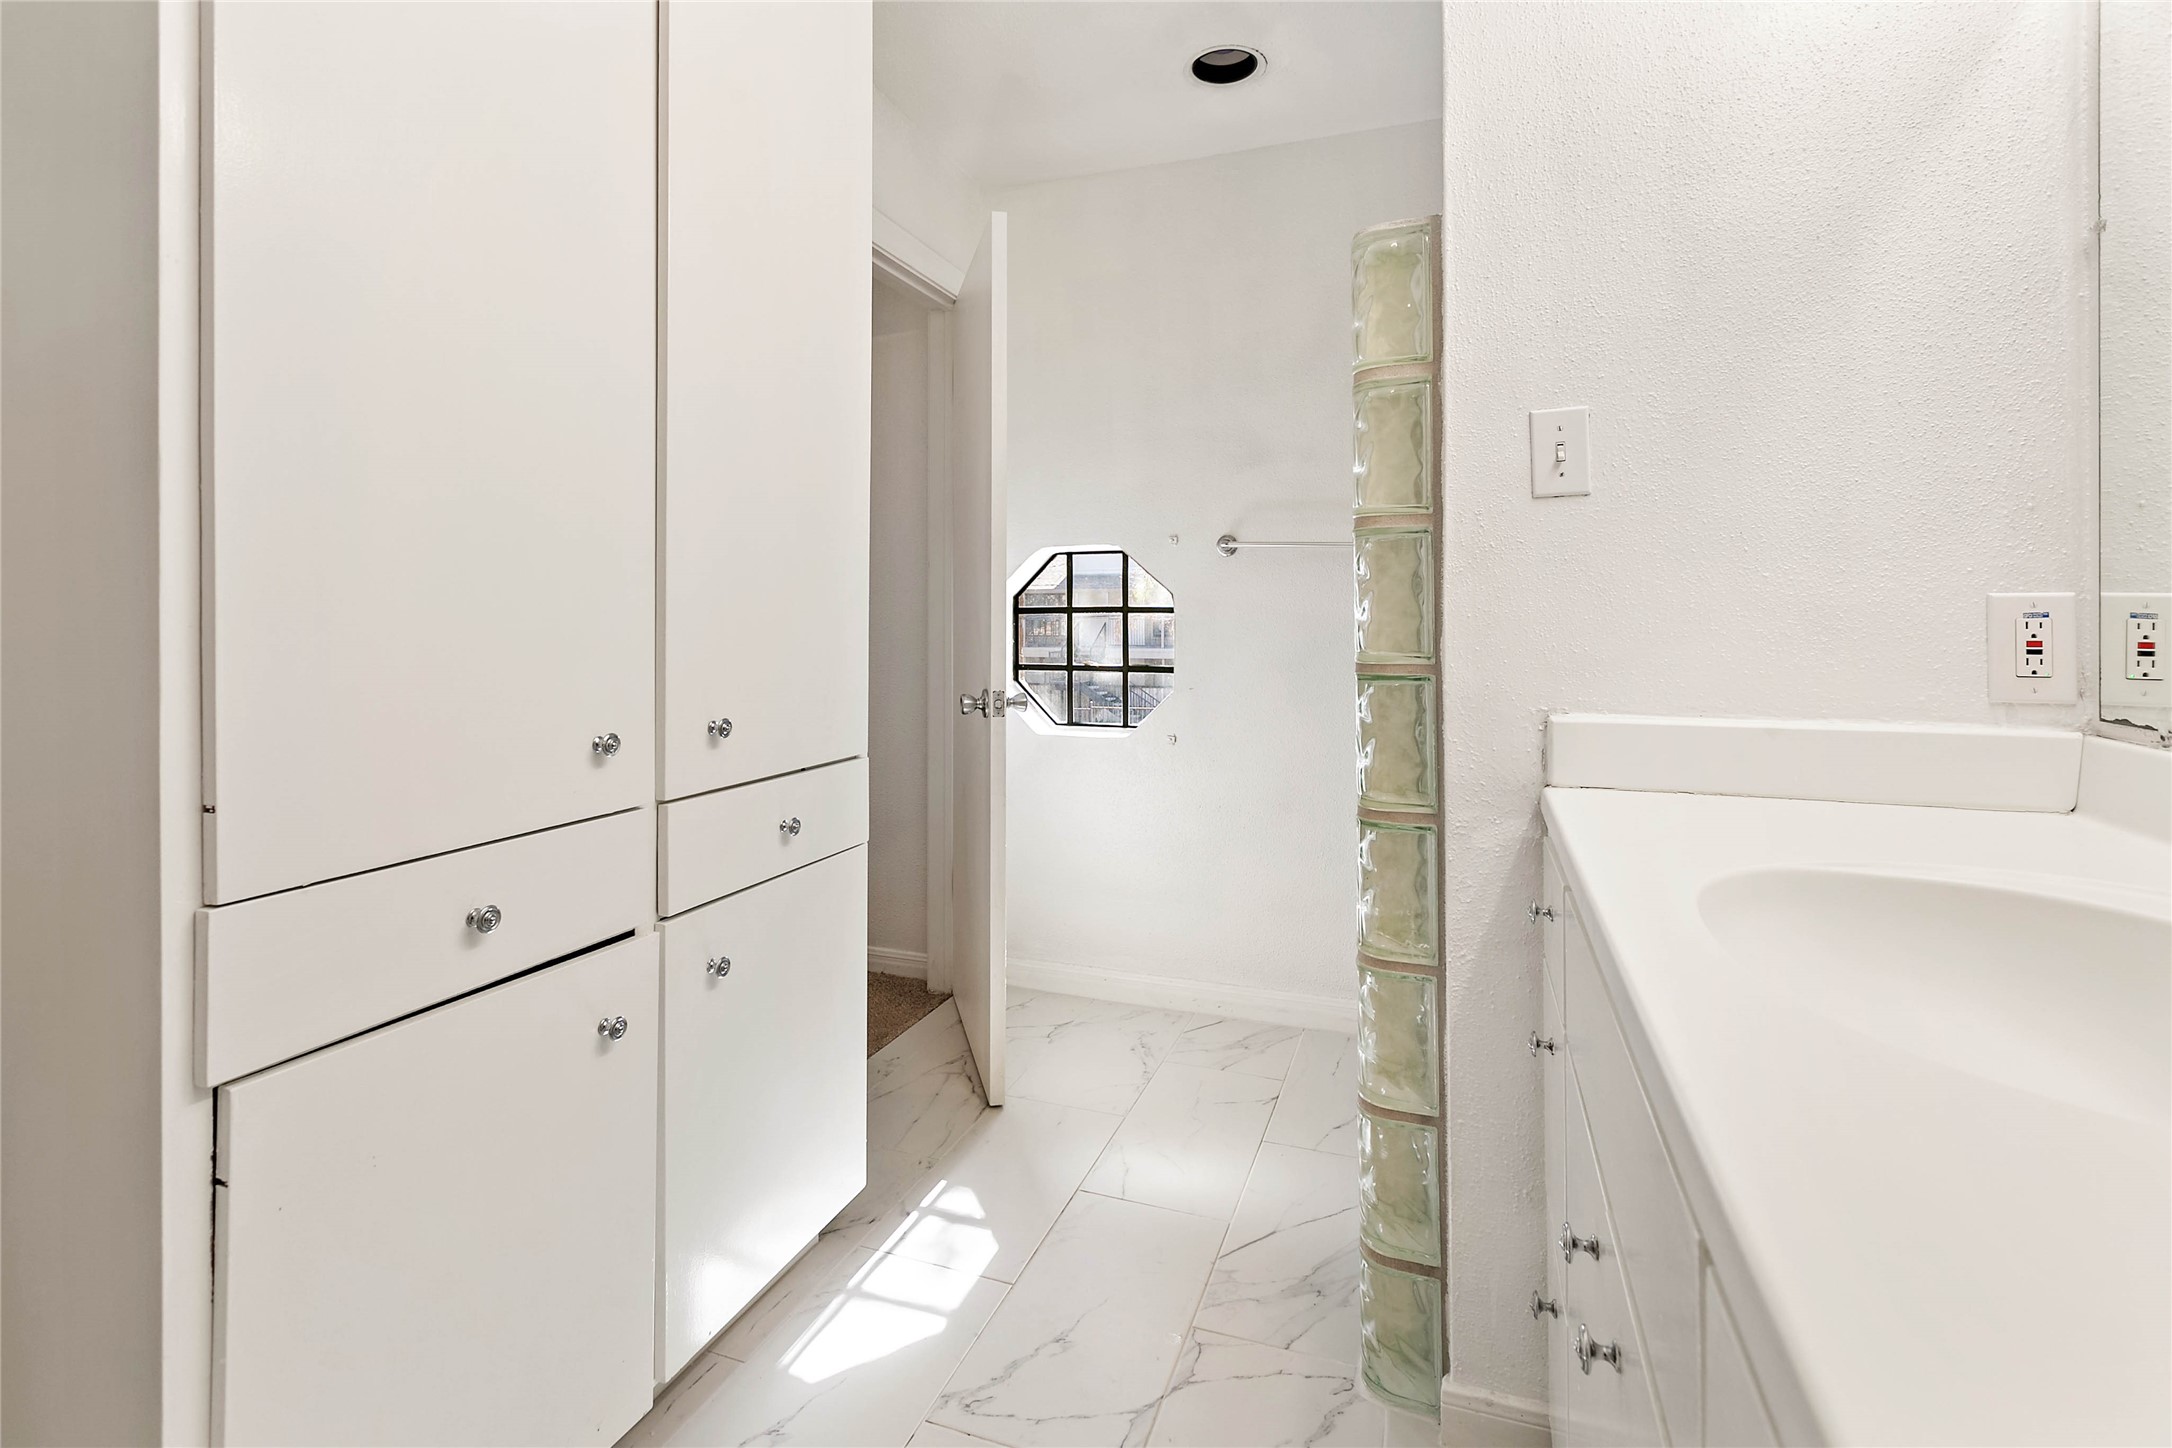 Built-ins offer storage space in the primary bathroom.